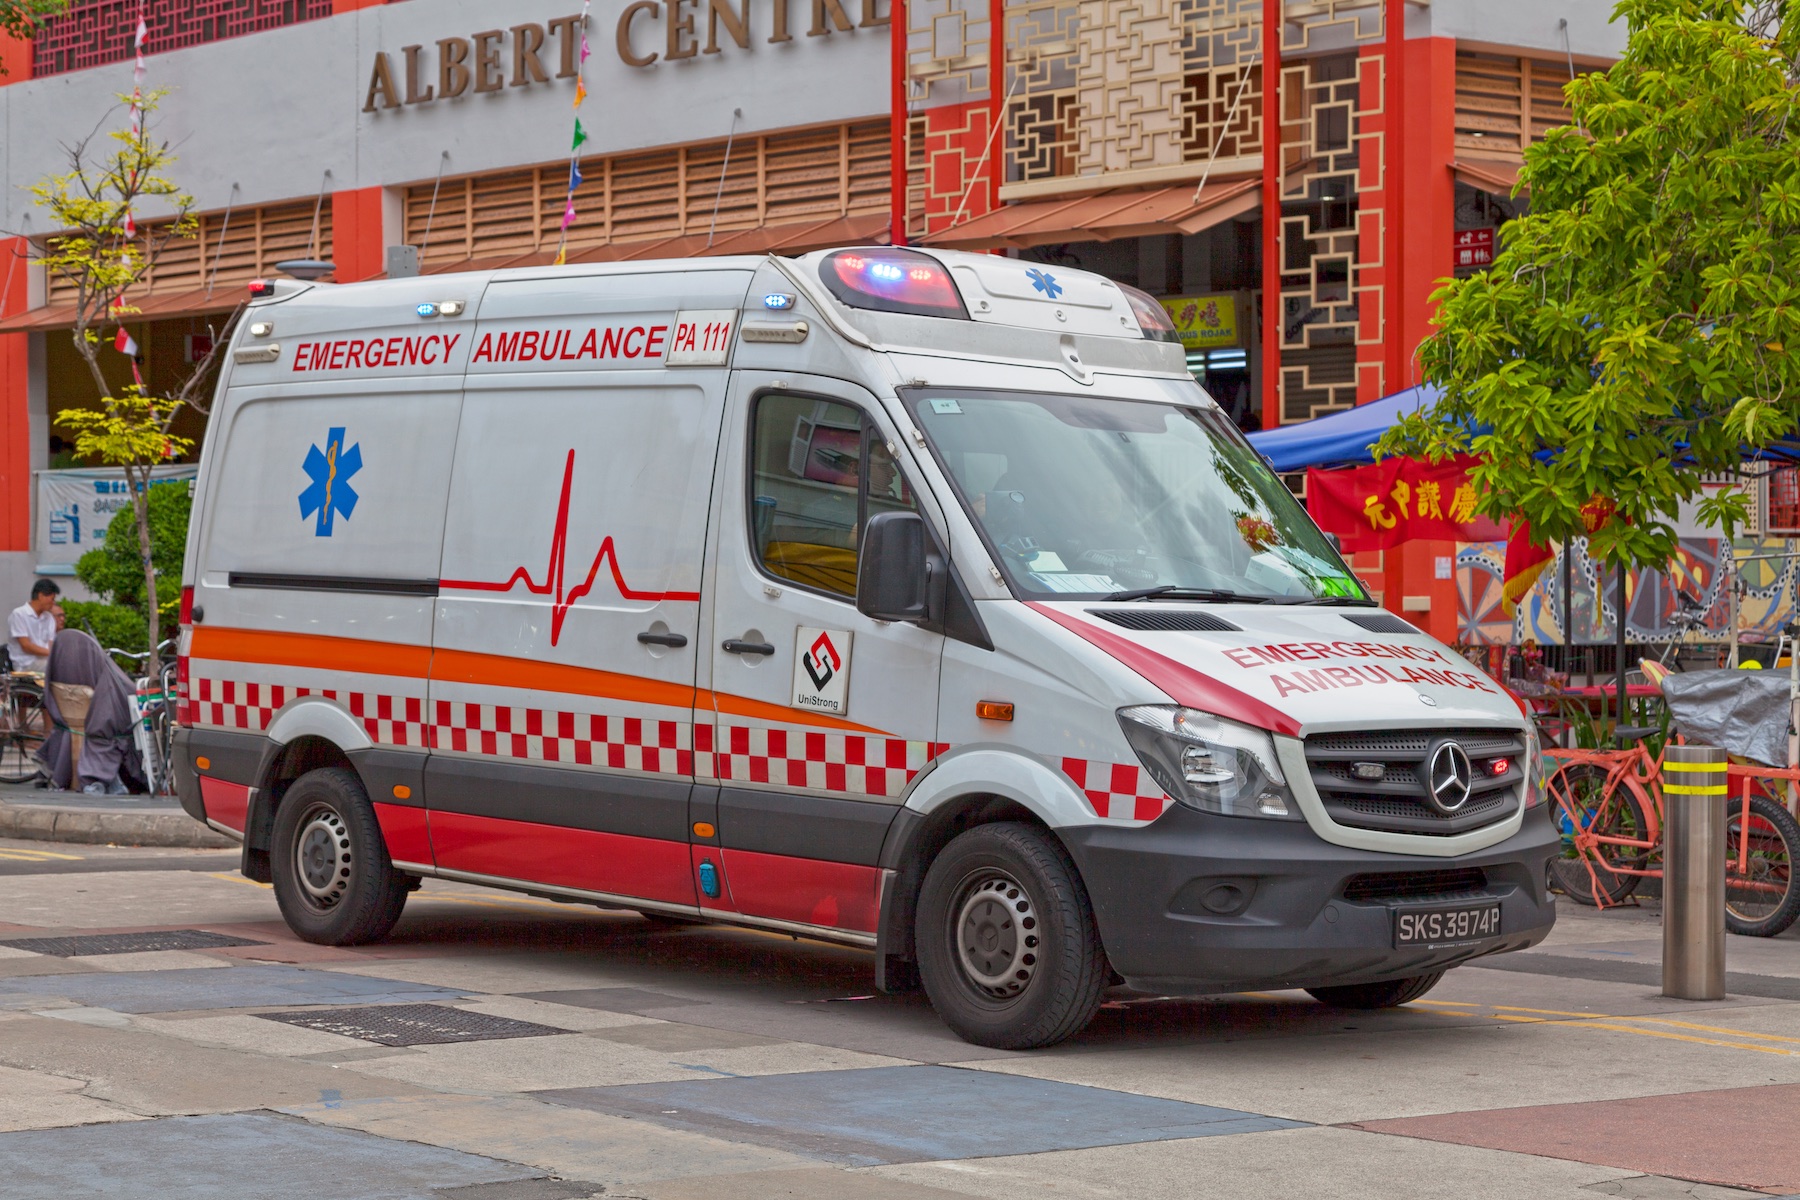 An ambulance is parked on the street outside a shopping center
